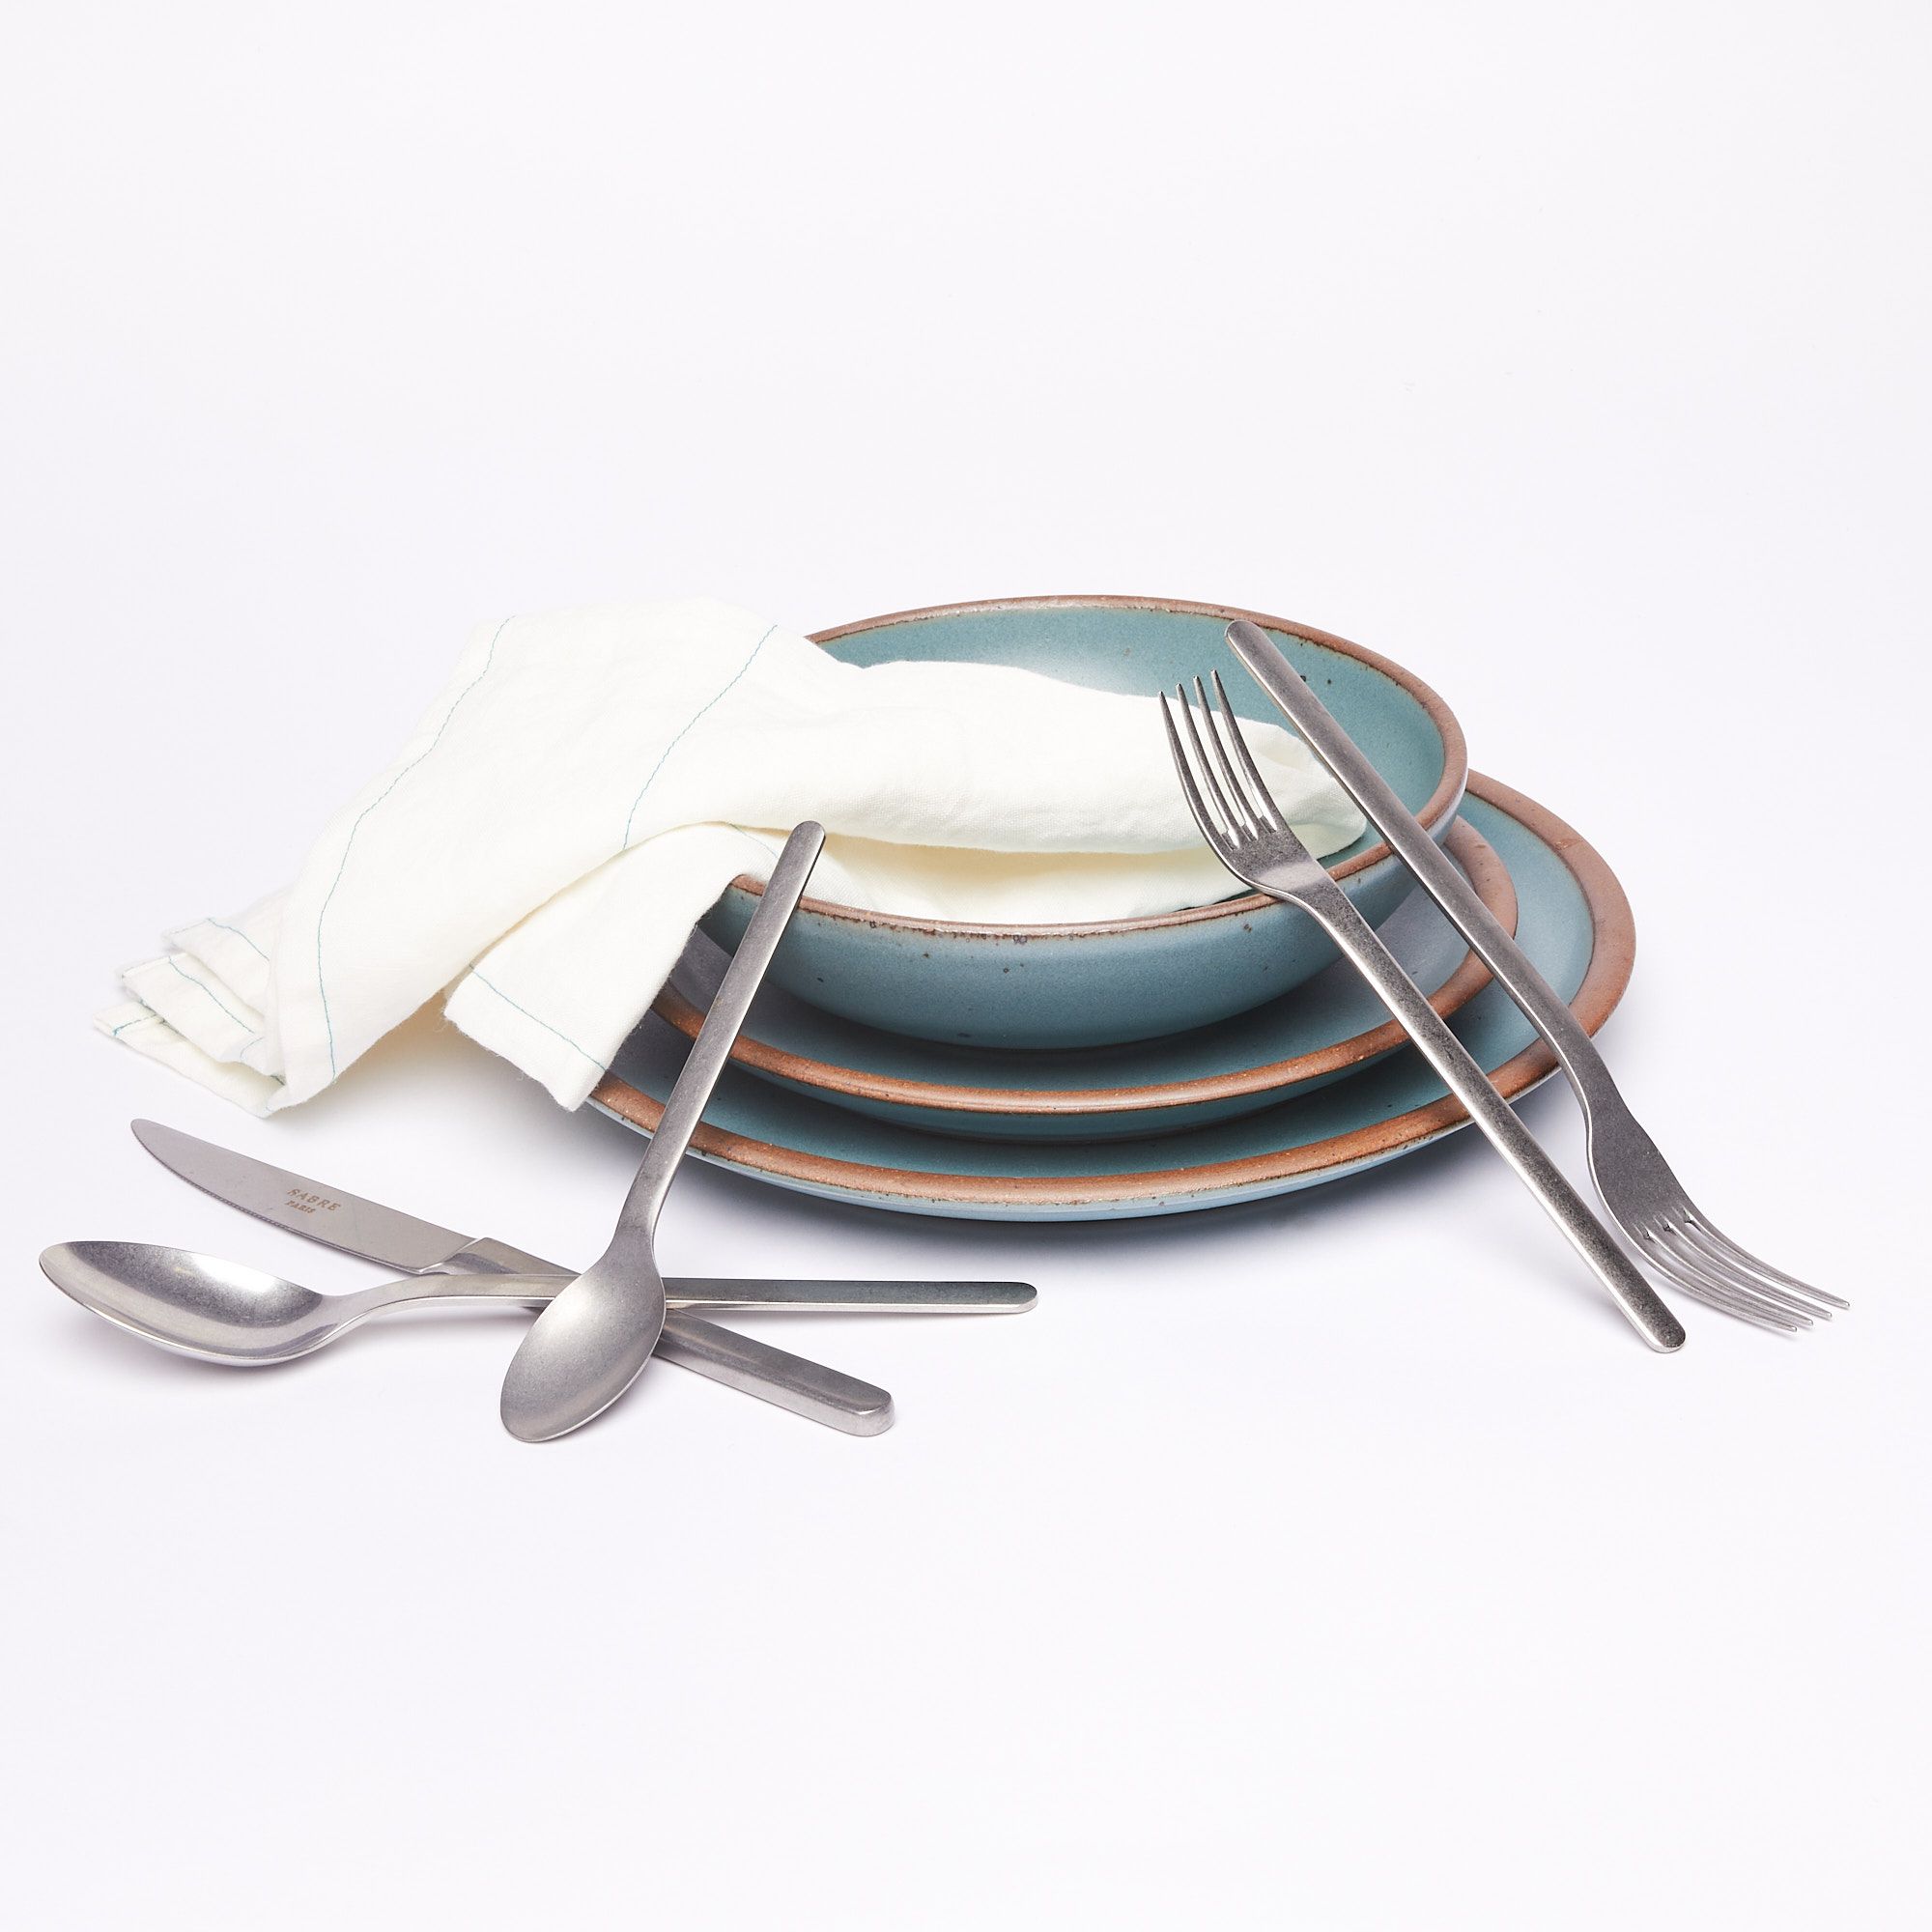 An everyday bowl, side plate, and dinner plate in turquoise stacked with a linen napkin surround by five pieces of stainless steel flatware